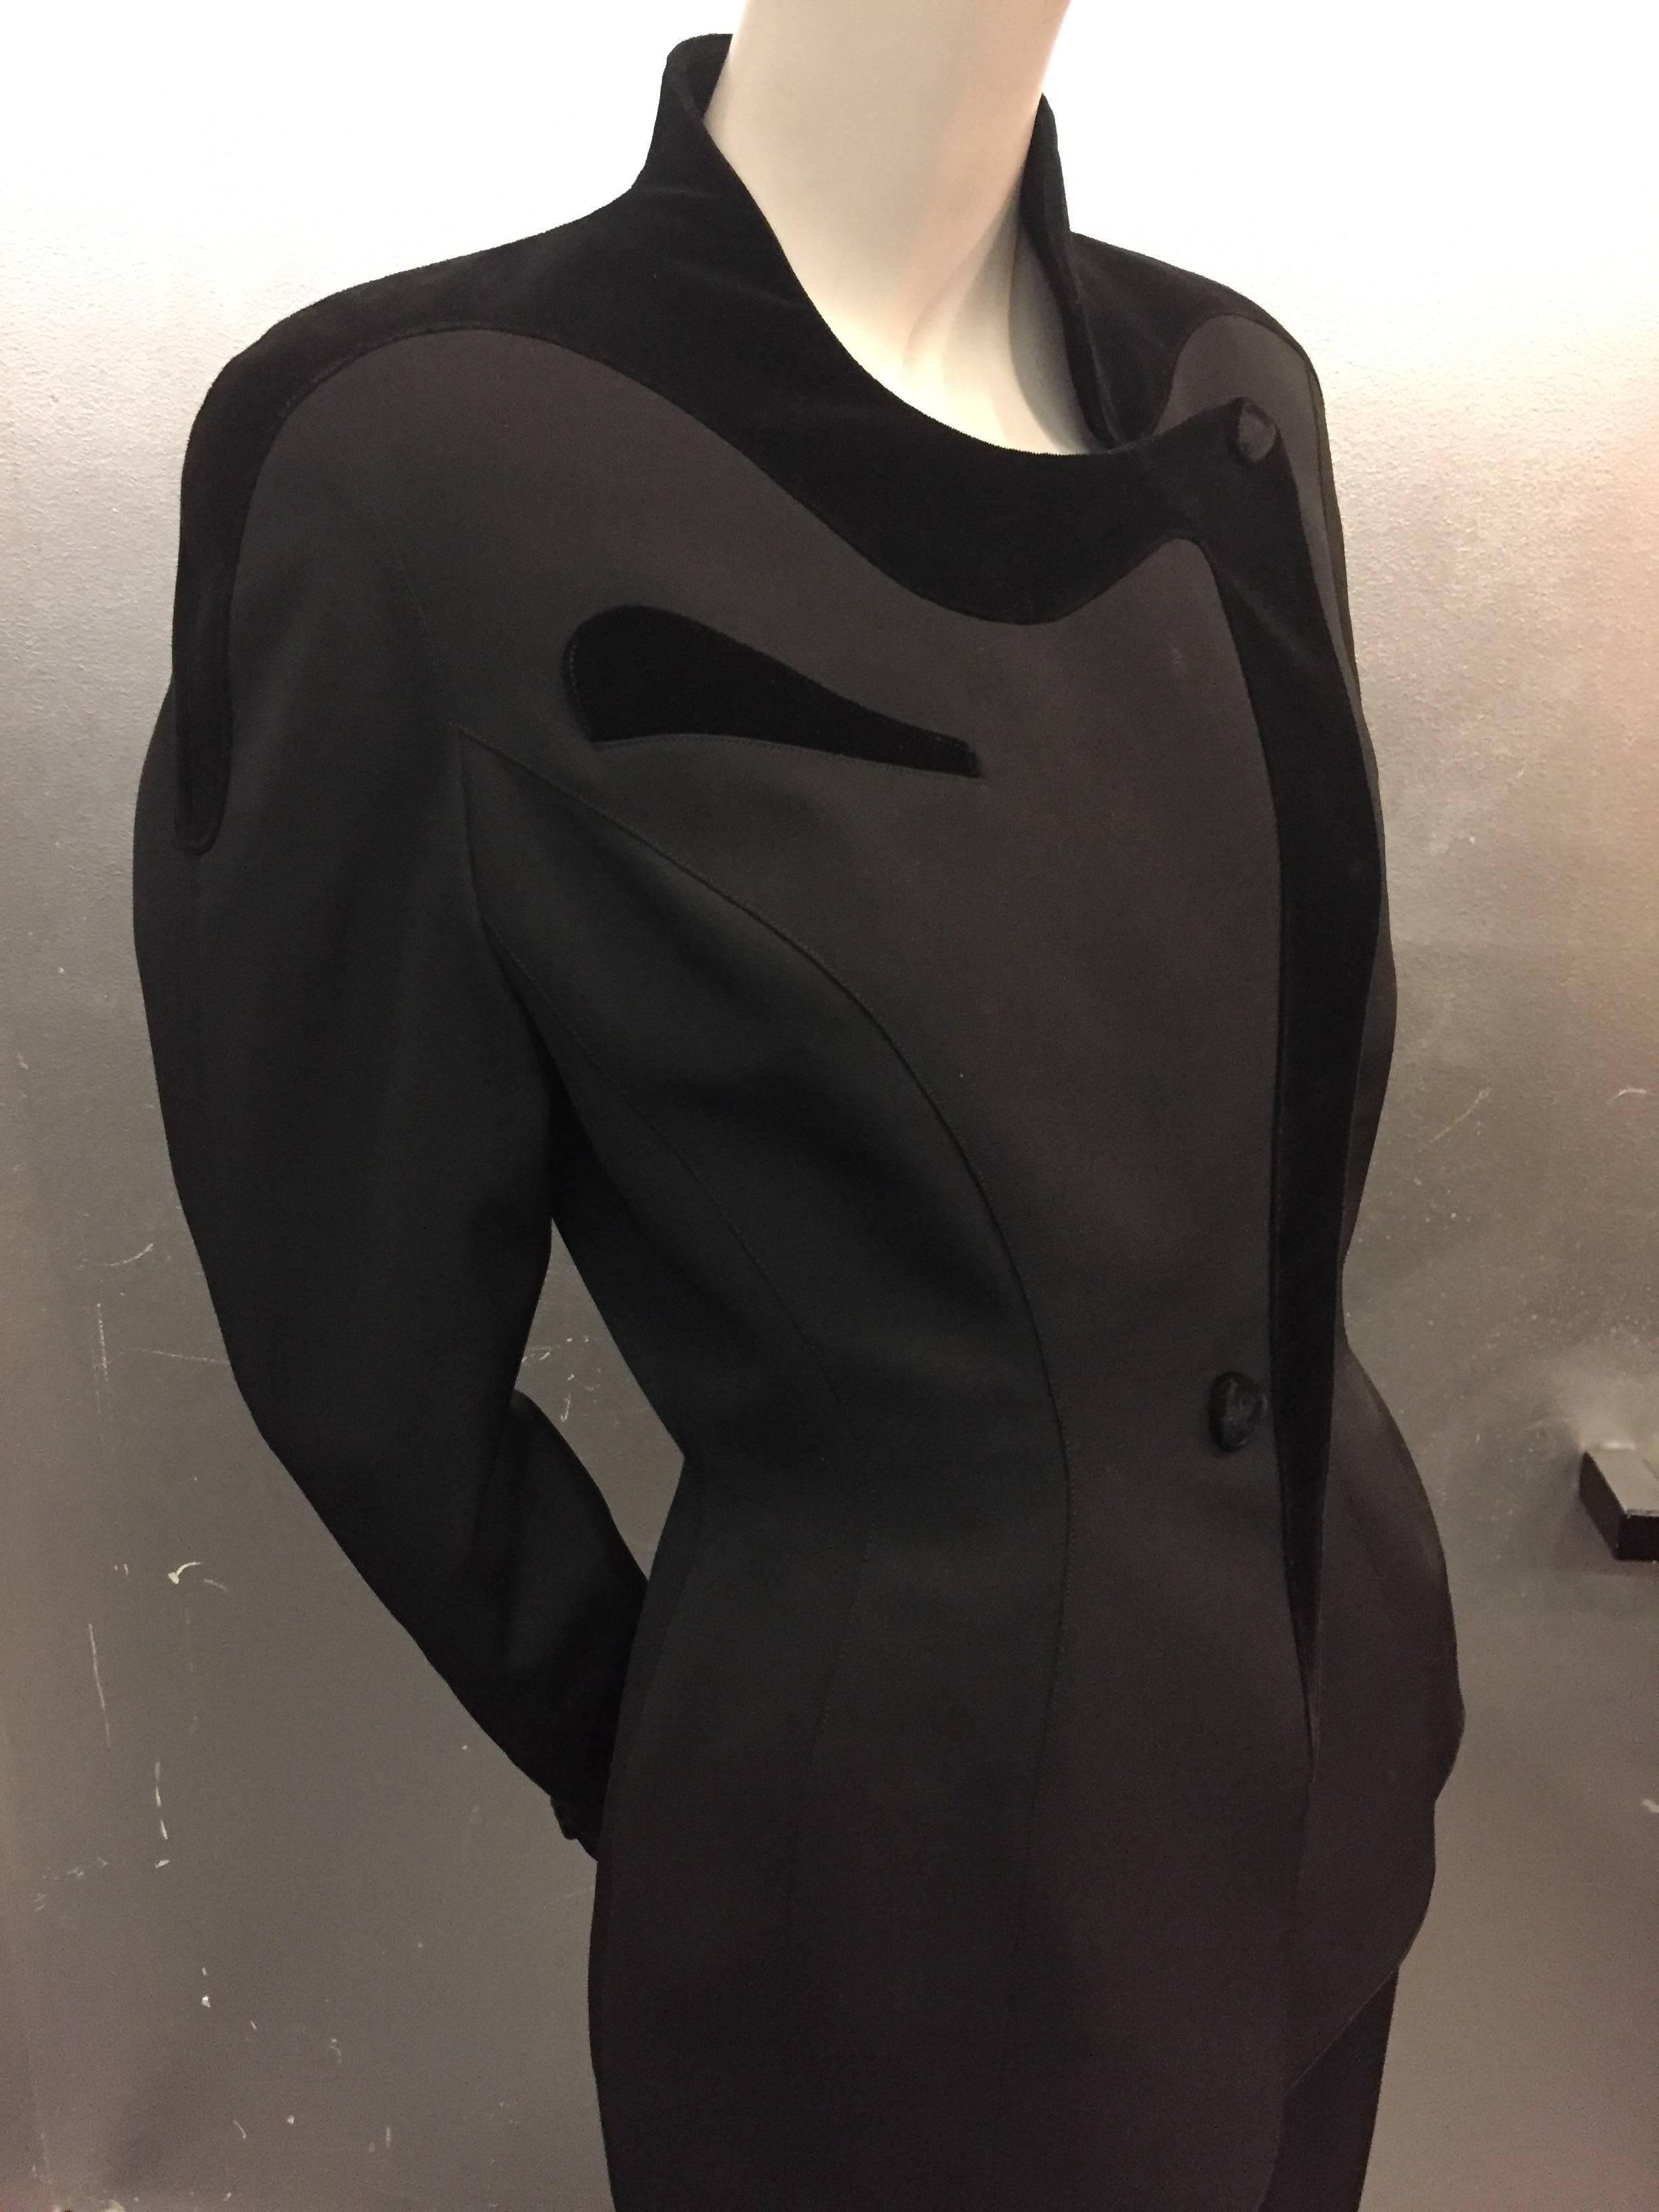 Women's 1980s Thierry Mugler Iconic Wasp-Waist Black Wool and Velvet Asymmetrical Suit